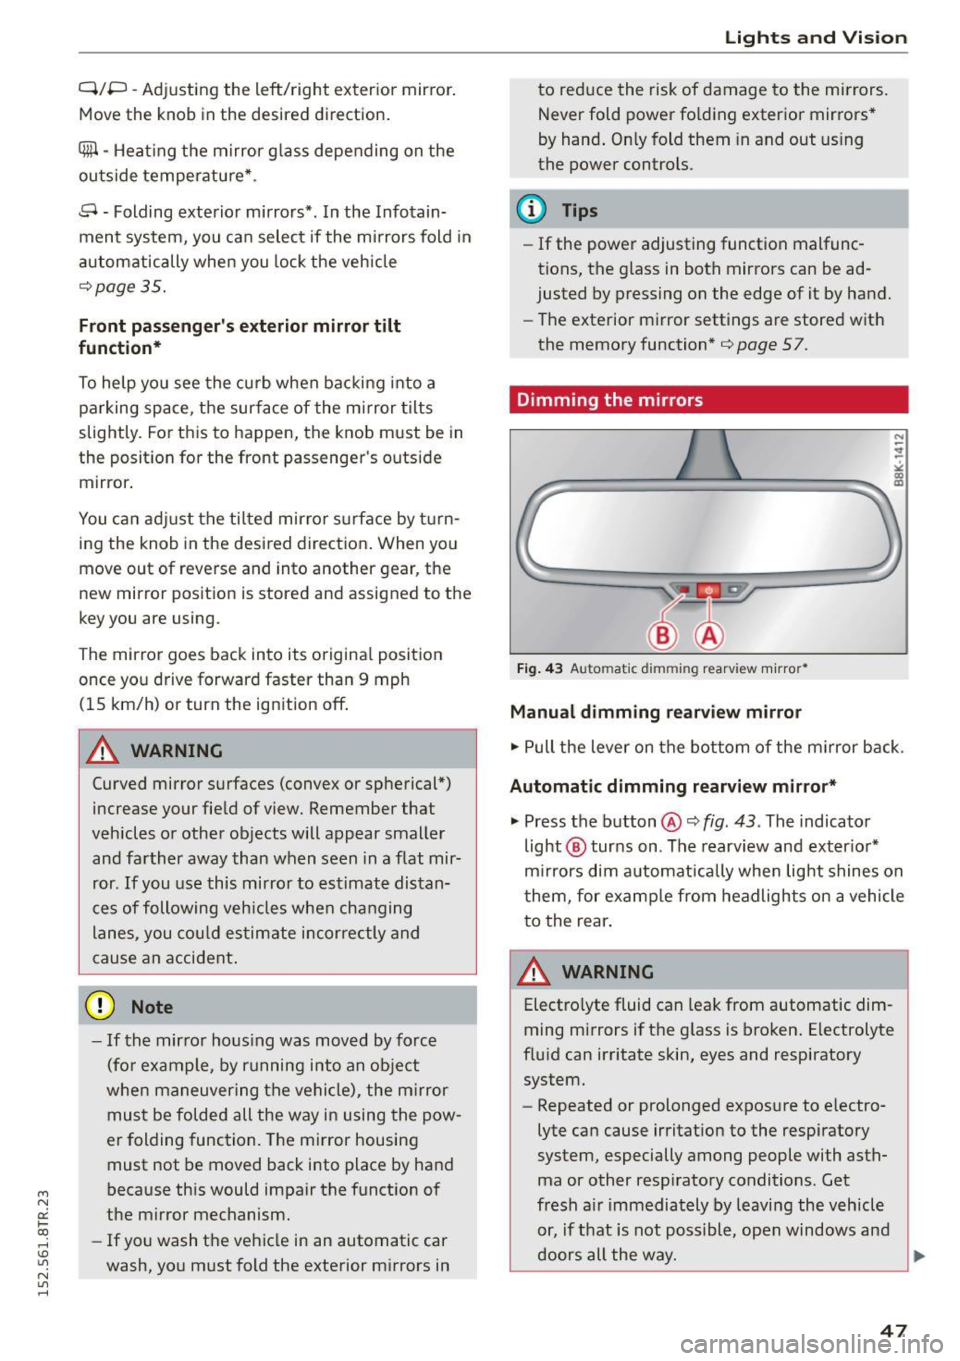 AUDI RS5 COUPE 2015 Service Manual " N 
0:: l­oo 
rl I.O 
" N 
" rl 
Q/P -Adjusting  the  left/right  exterior mirror. 
Move  the knob  in  the desired  direction. 
®-Heat ing  the  mirror  g lass  depending  on  the 
ou tside  te